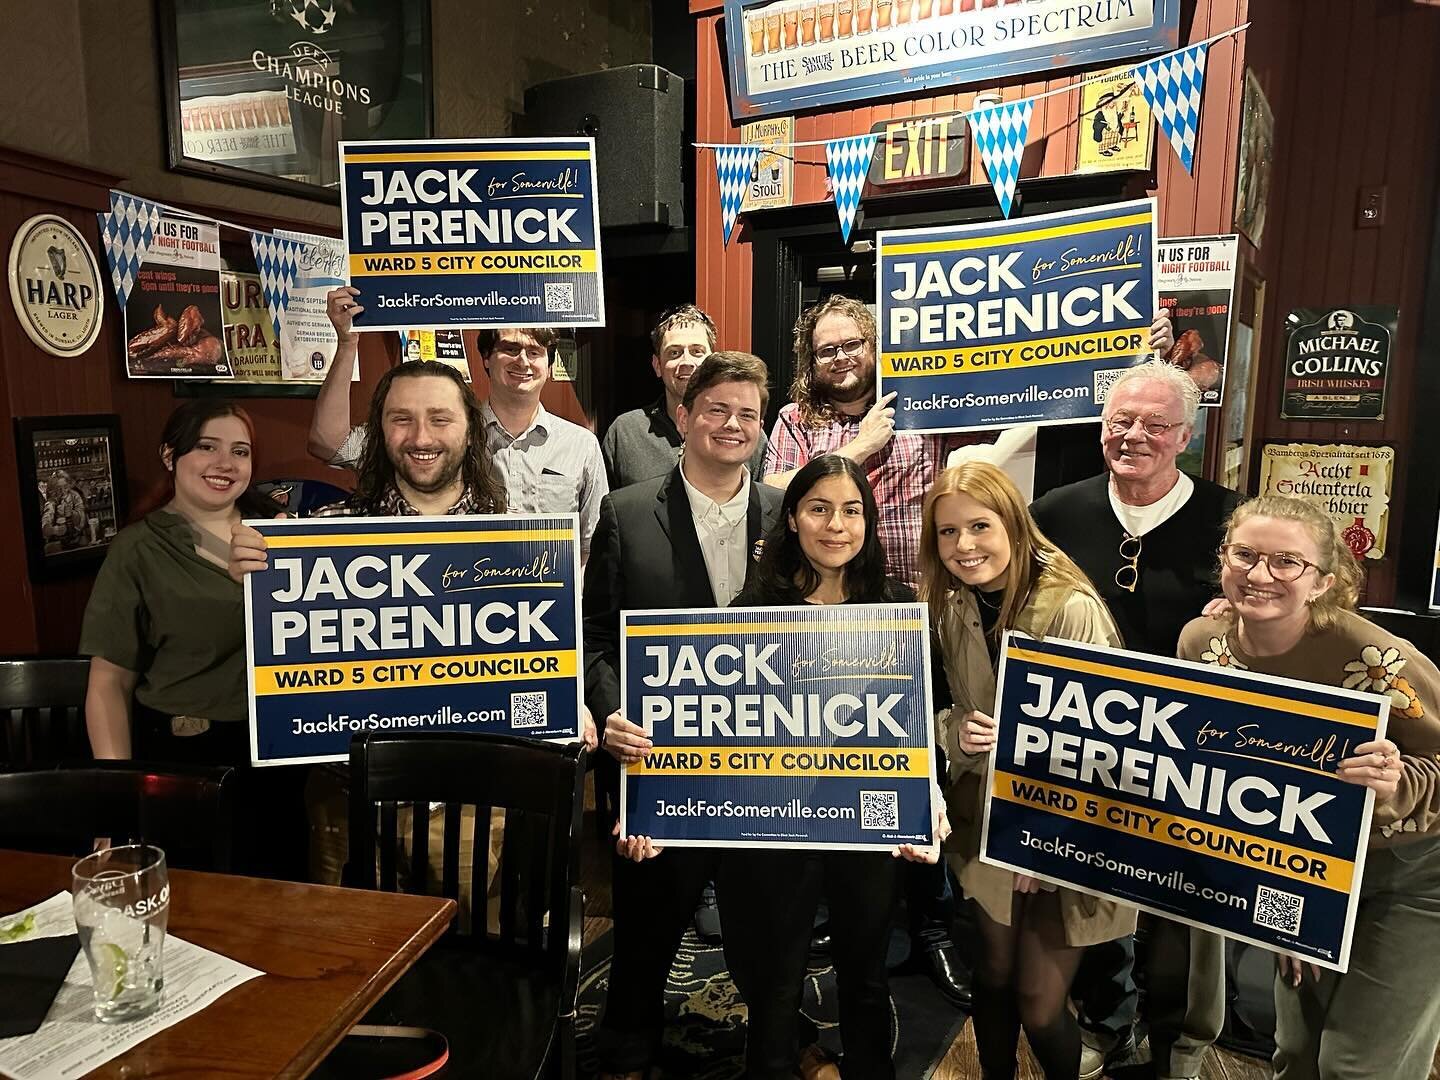 Thanks to all the friends and supporters who came out to Olde Magoun&rsquo;s Saloon this week to support my campaign! If you&rsquo;d like to learn more or become a supporter of our campaign, visit the link in bio.